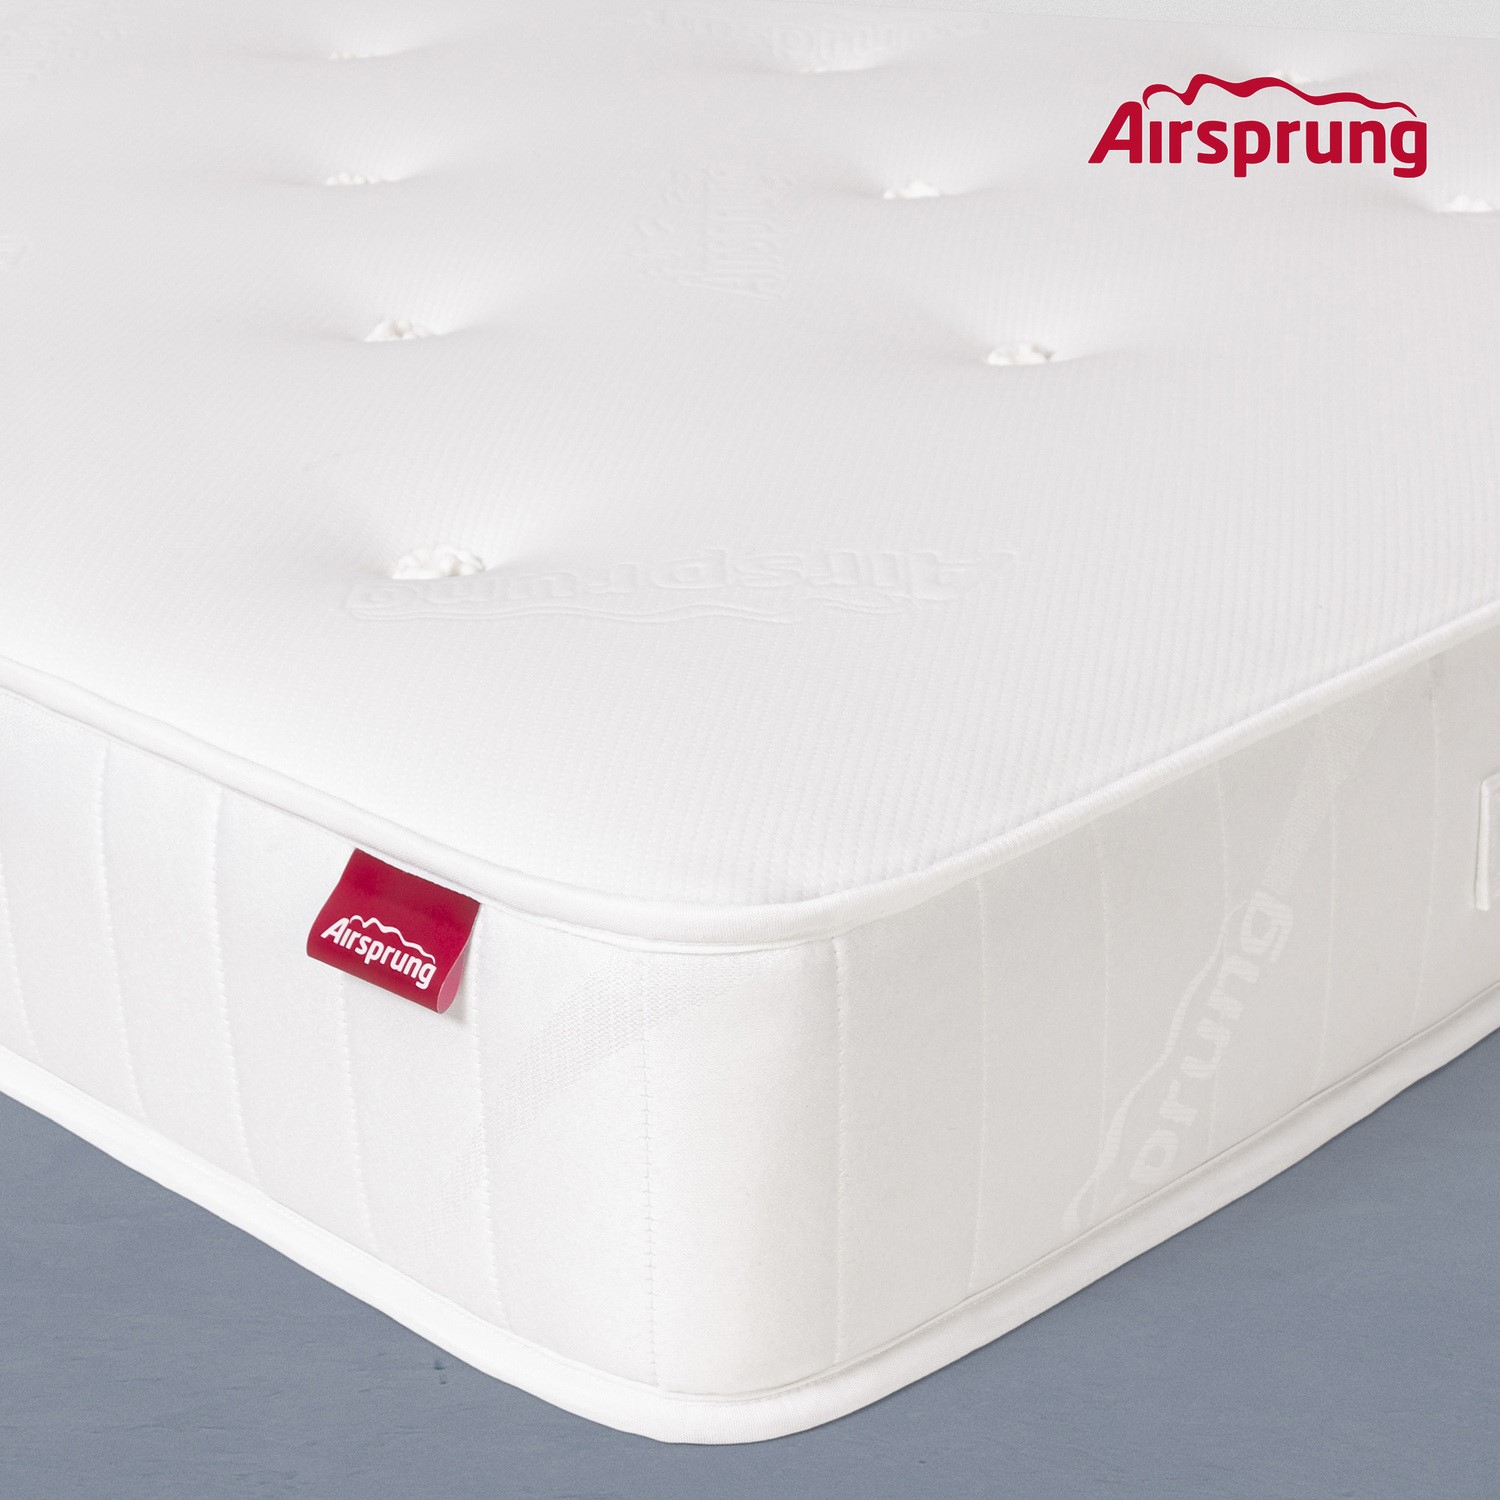 Airsprung ultra firm rolled coil spring mattress - single